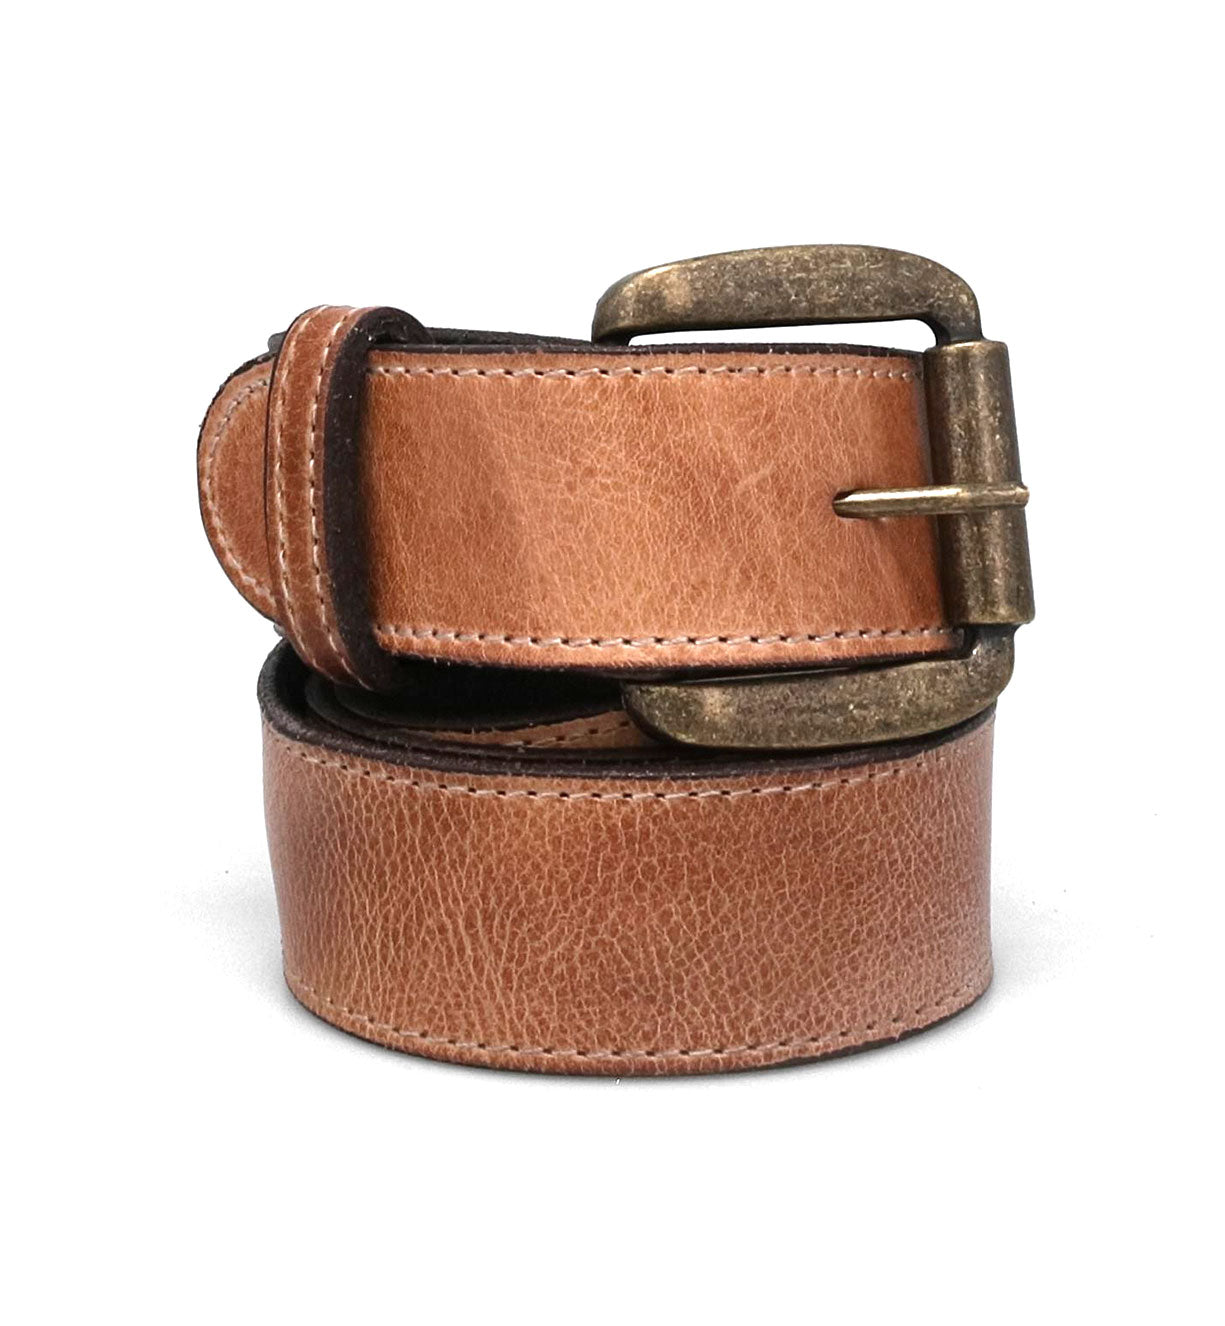 A Meander tan leather belt with a brass buckle from the Bed Stu brand.